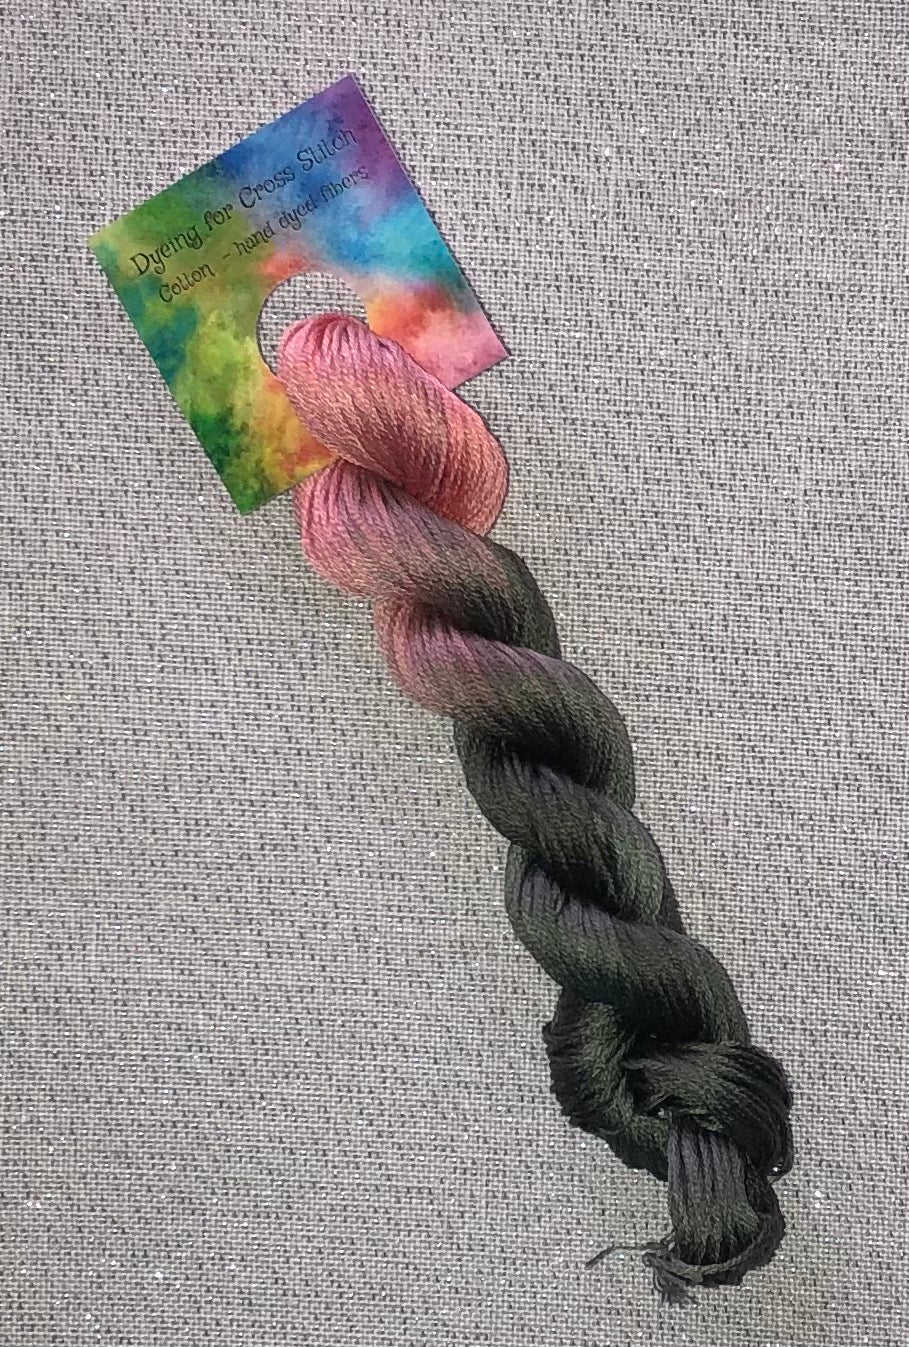 Cotton hand dyed floss - Pink Camo - Dyeing for Cross Stitch